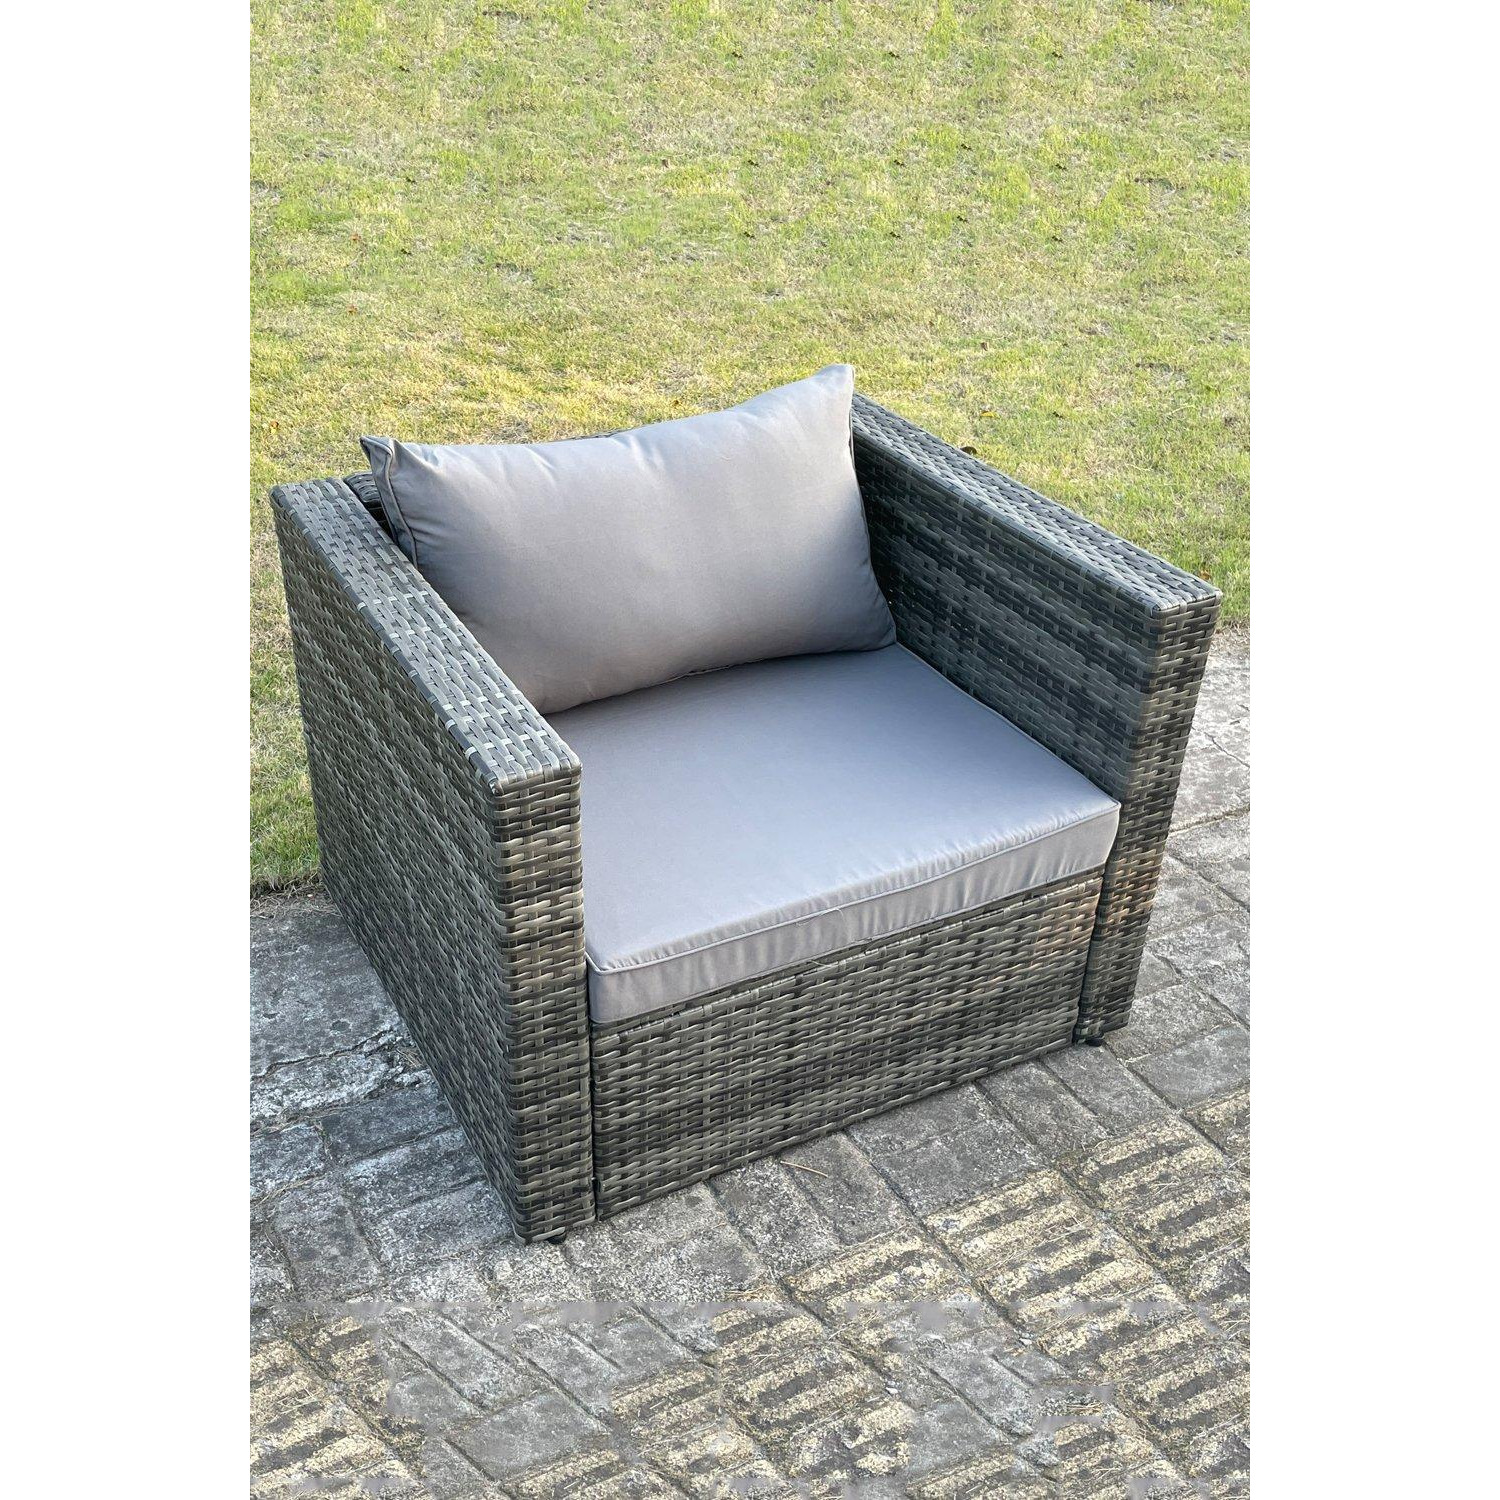 Outdoor Rattan Single Sofa Chair Garden Furniture With Seat and Back Cushion - image 1